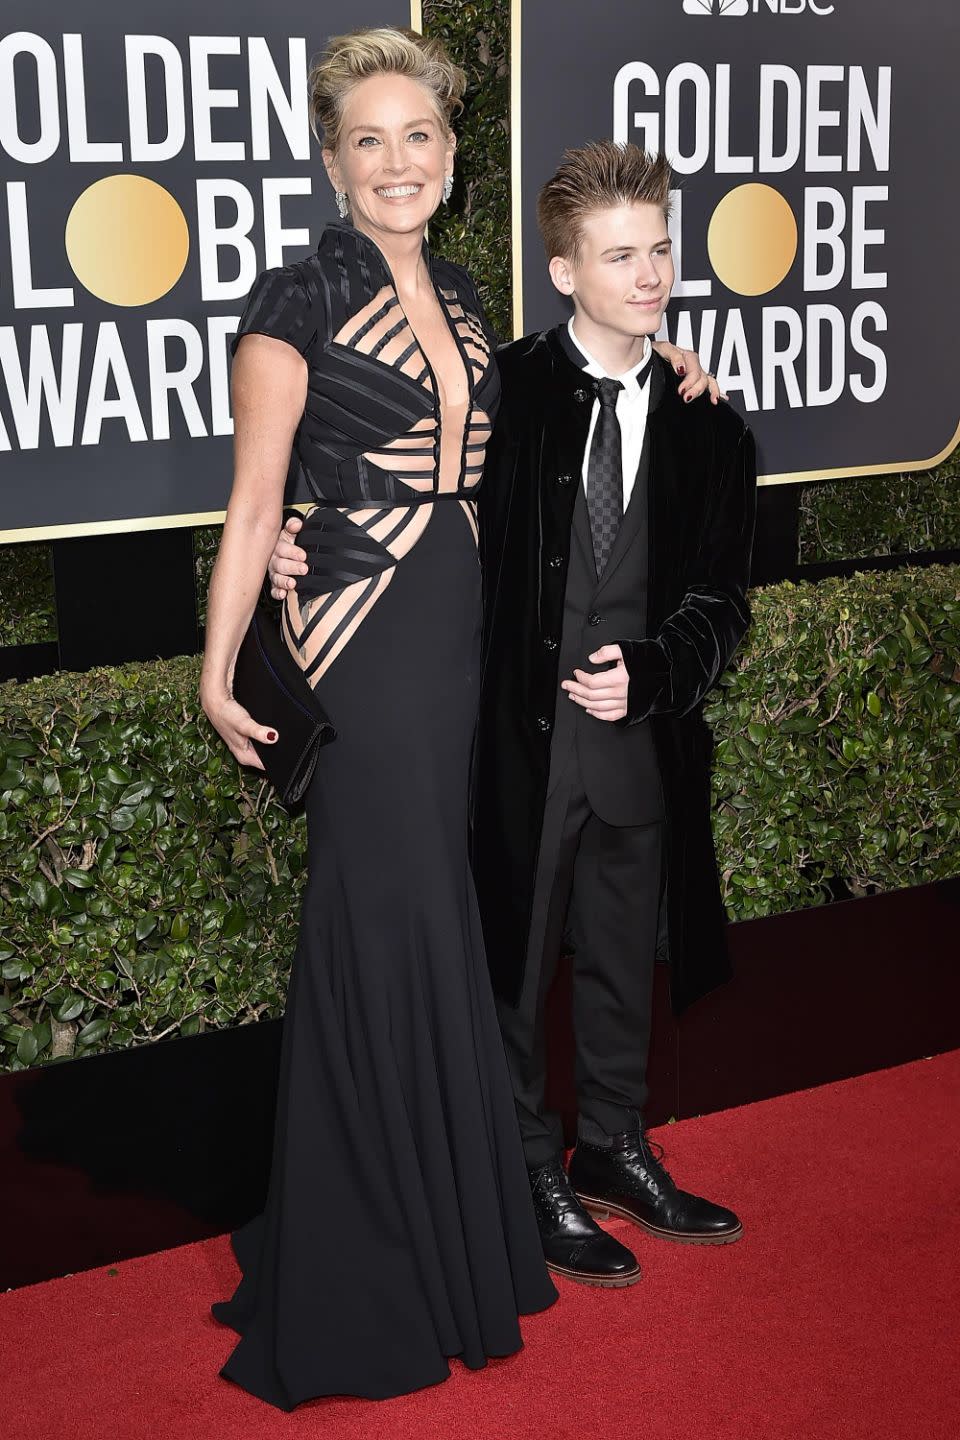 Sharon brought her son Roan along as her date to the awards. Source: Getty